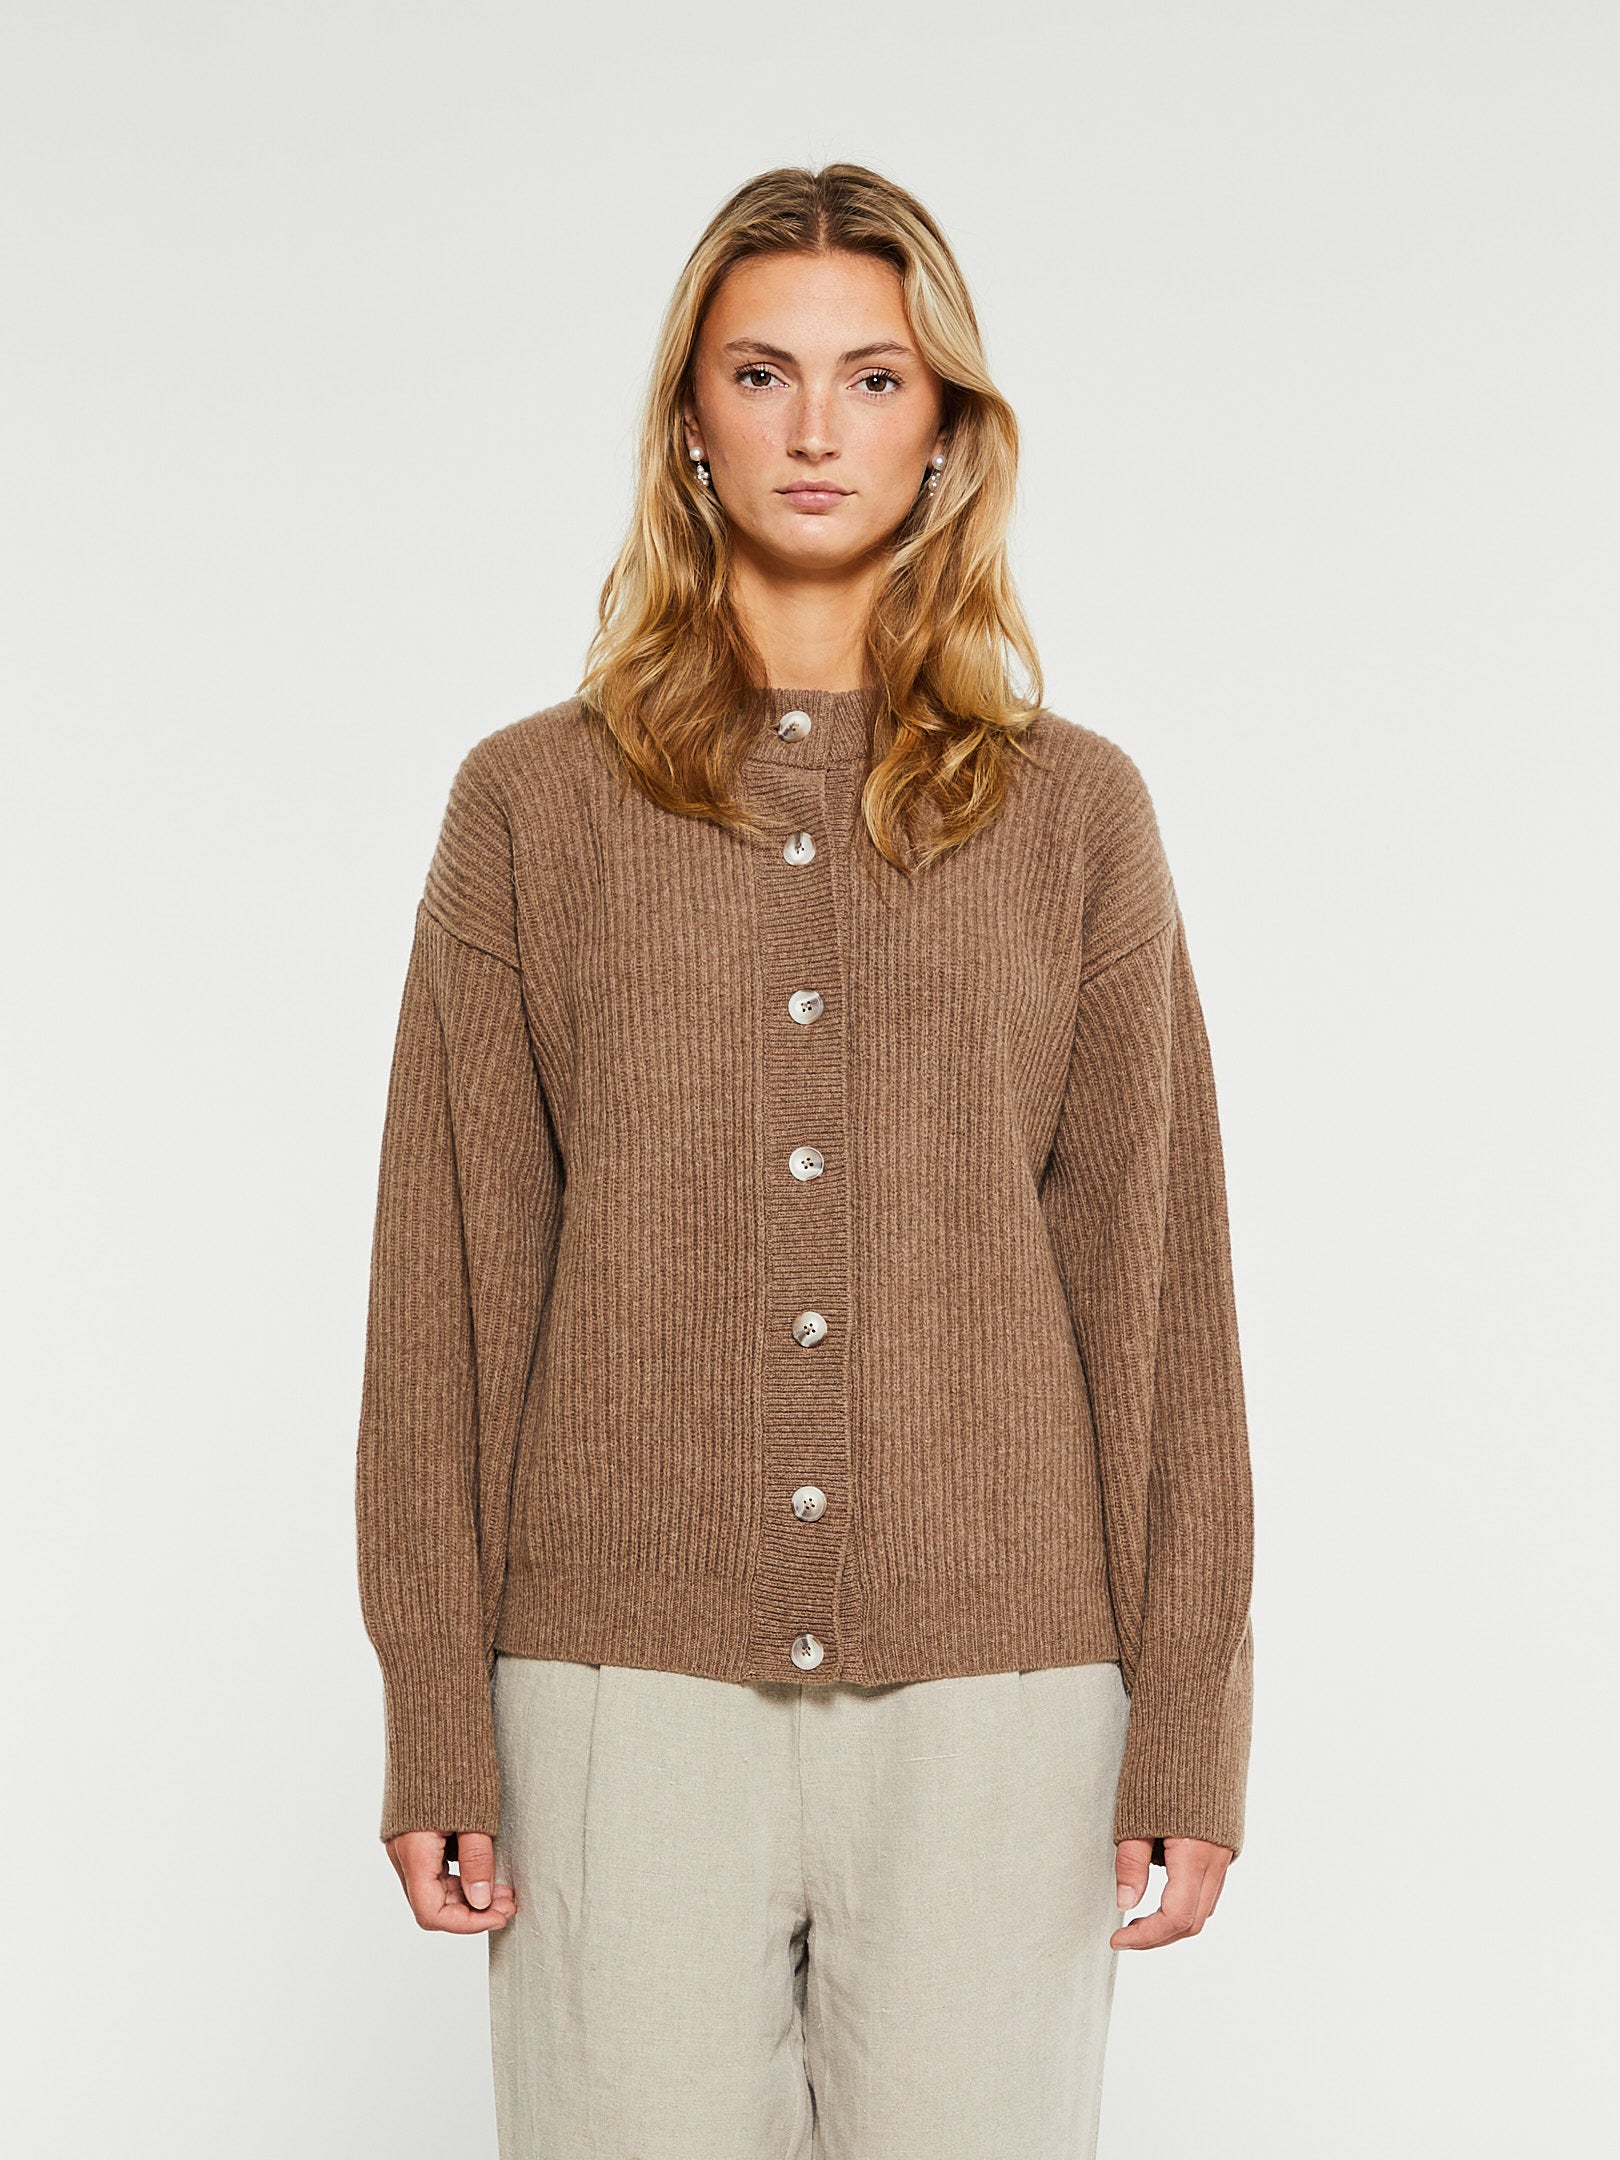 Knitwear | See Page – – the wide stoy STOY selection at